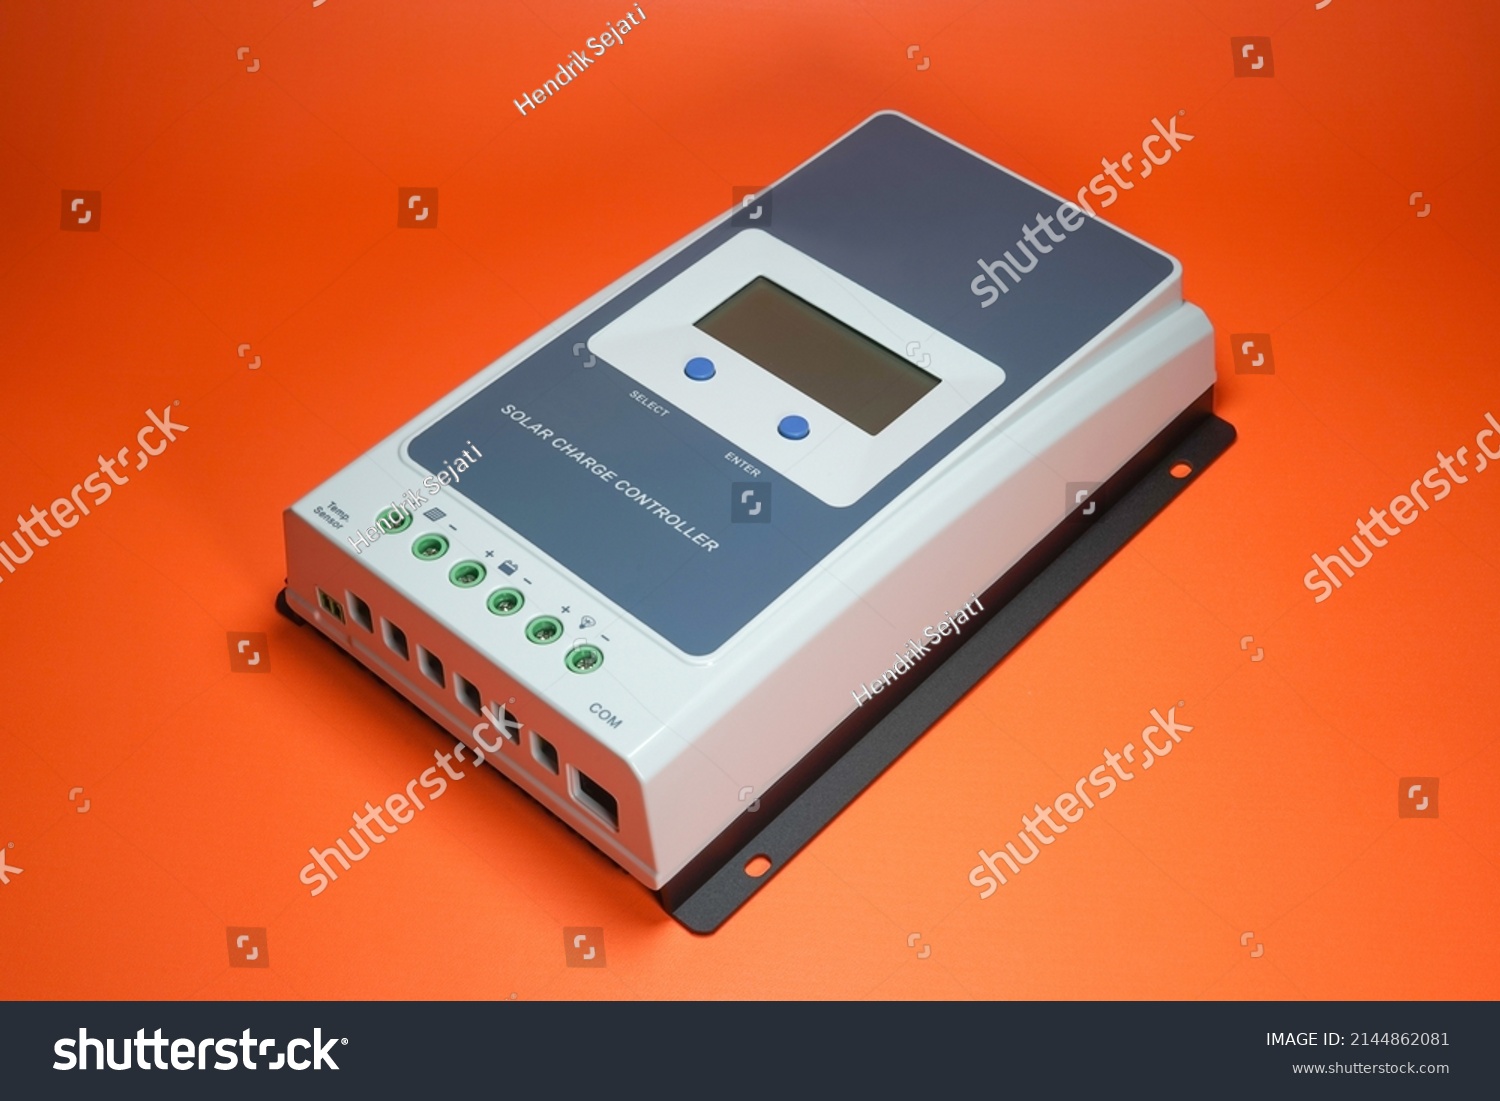 Solar charge controller for solar panel or solar electric energy, orange background isolated #2144862081